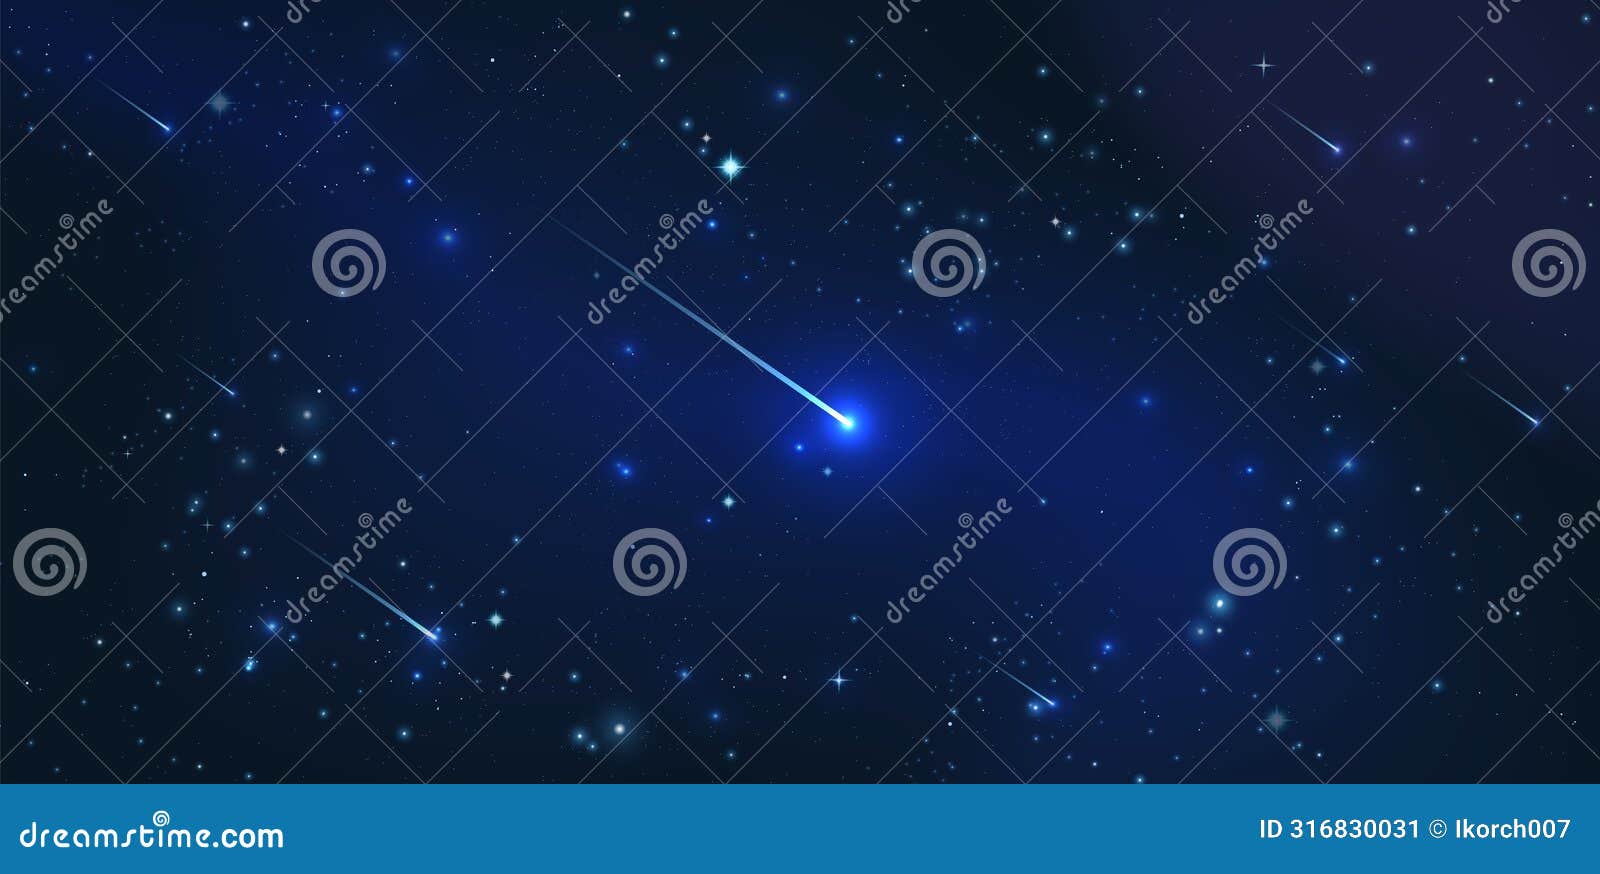 space with stars and comets. galaxy background. space stars, celestial panorama, night universe.